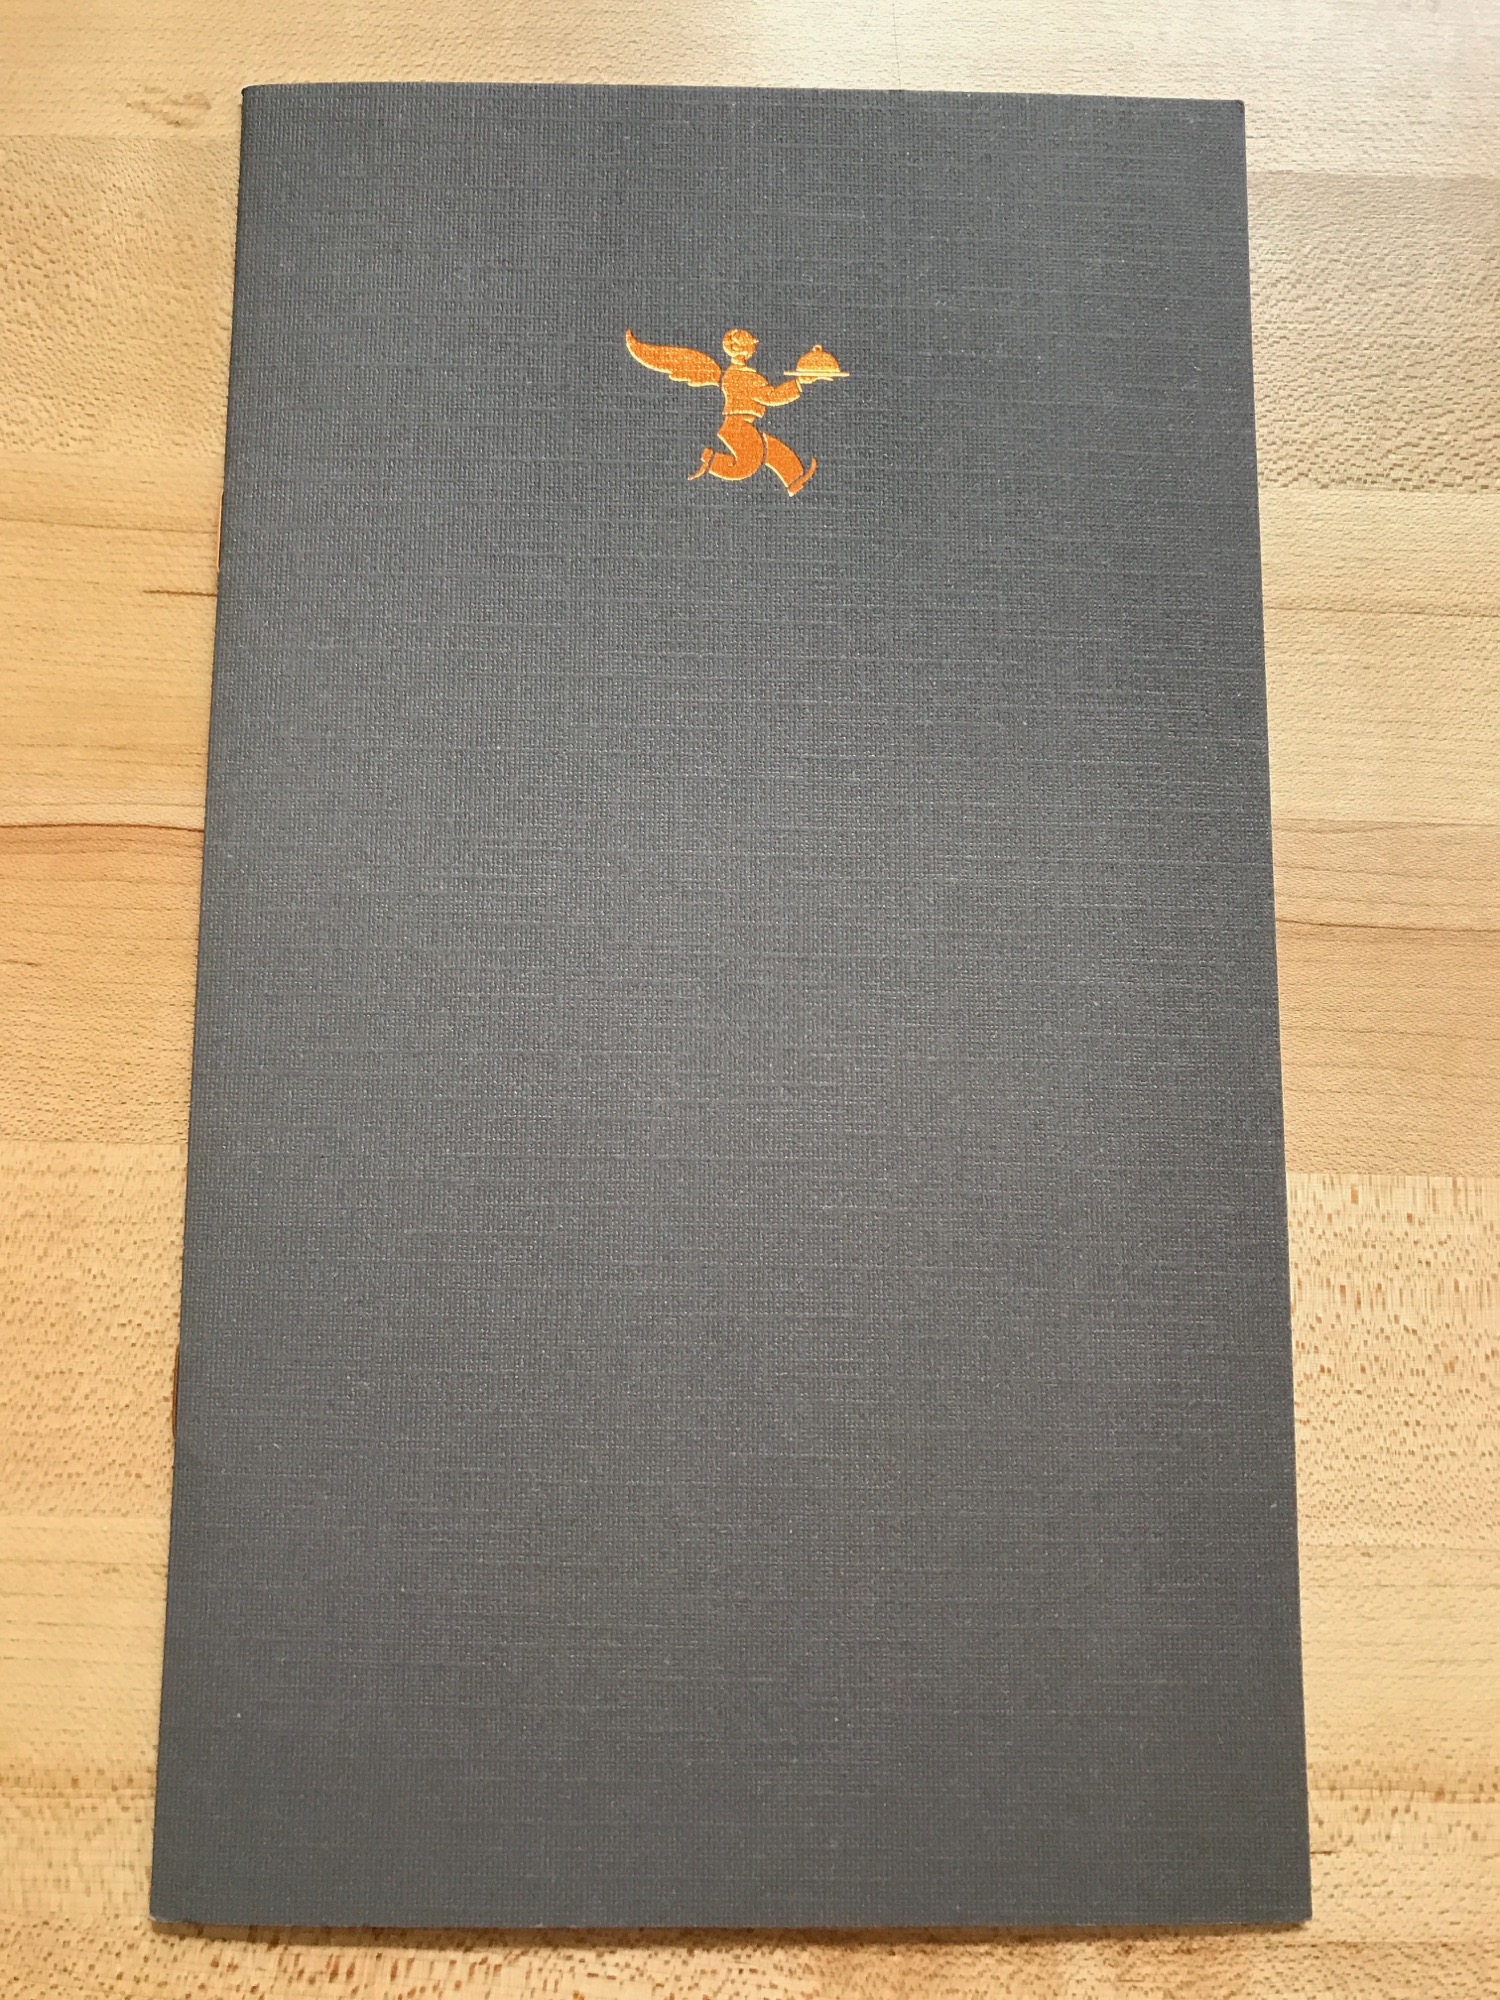 a grey mat with an orange figure on it